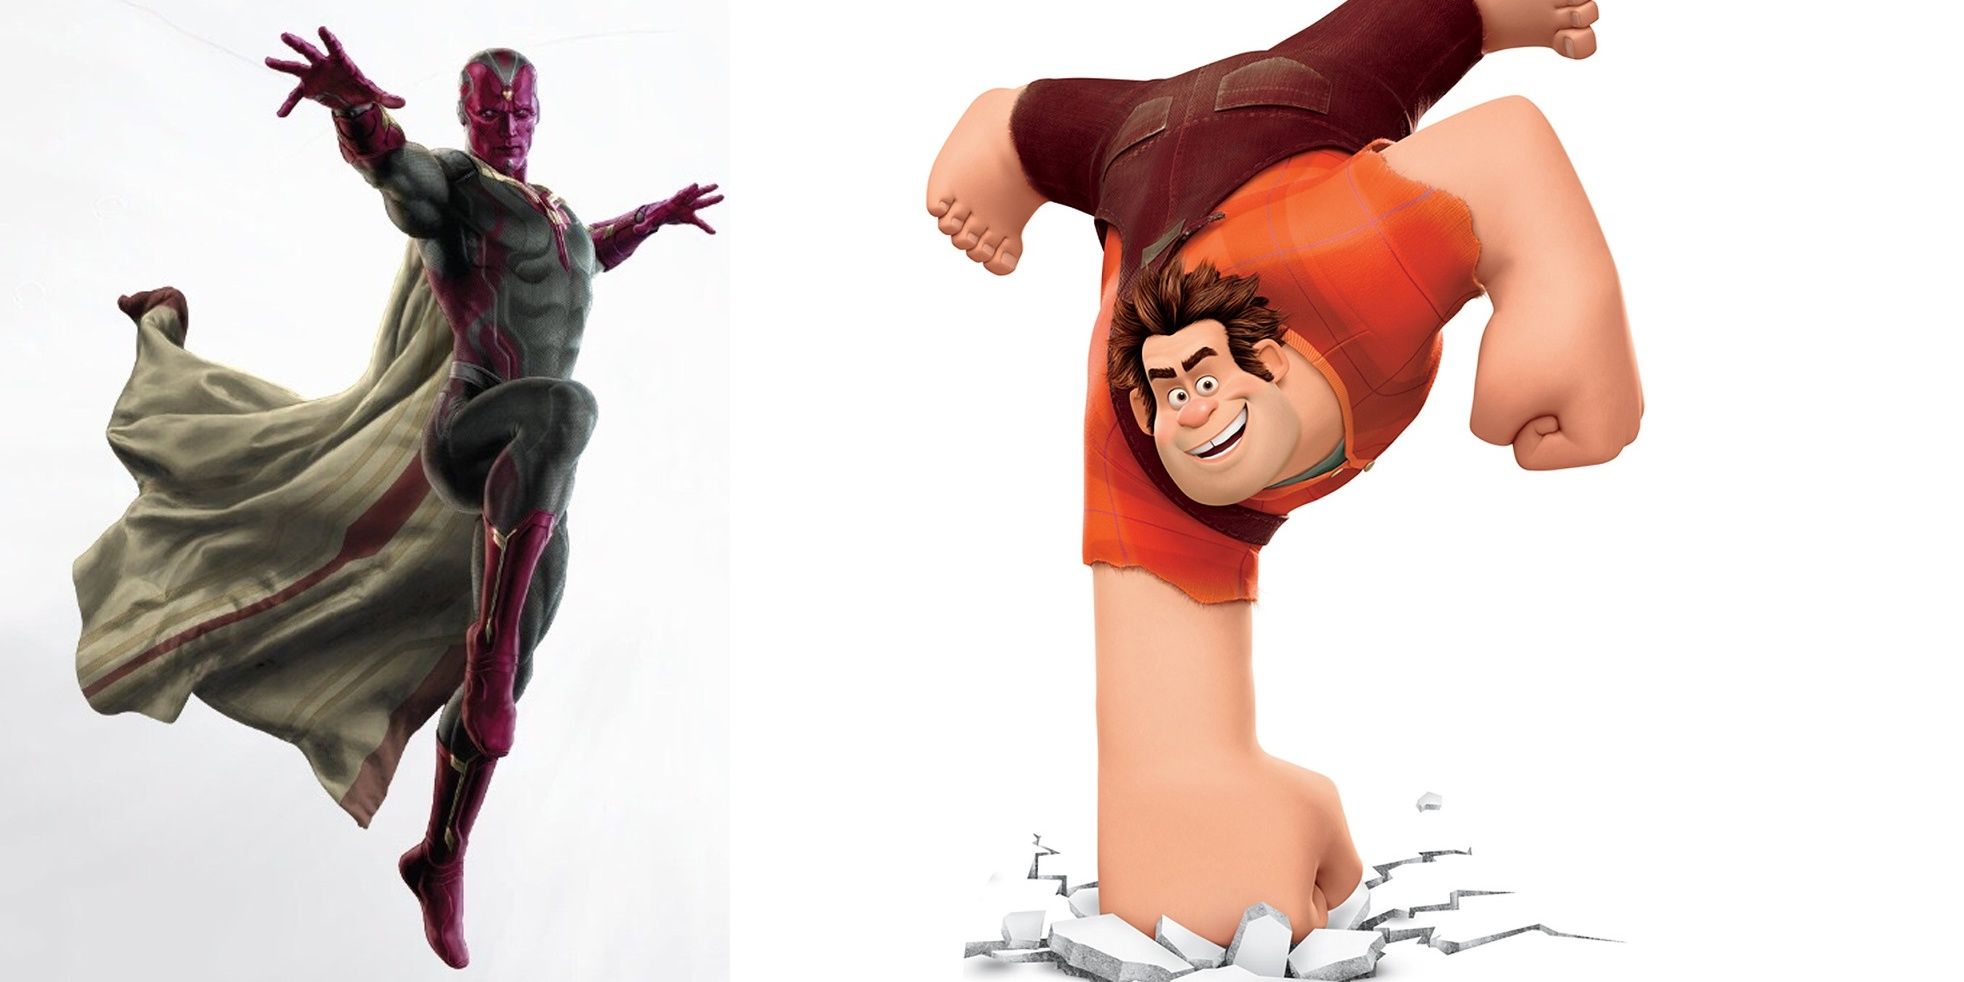 Vision and Wreck-it Ralph